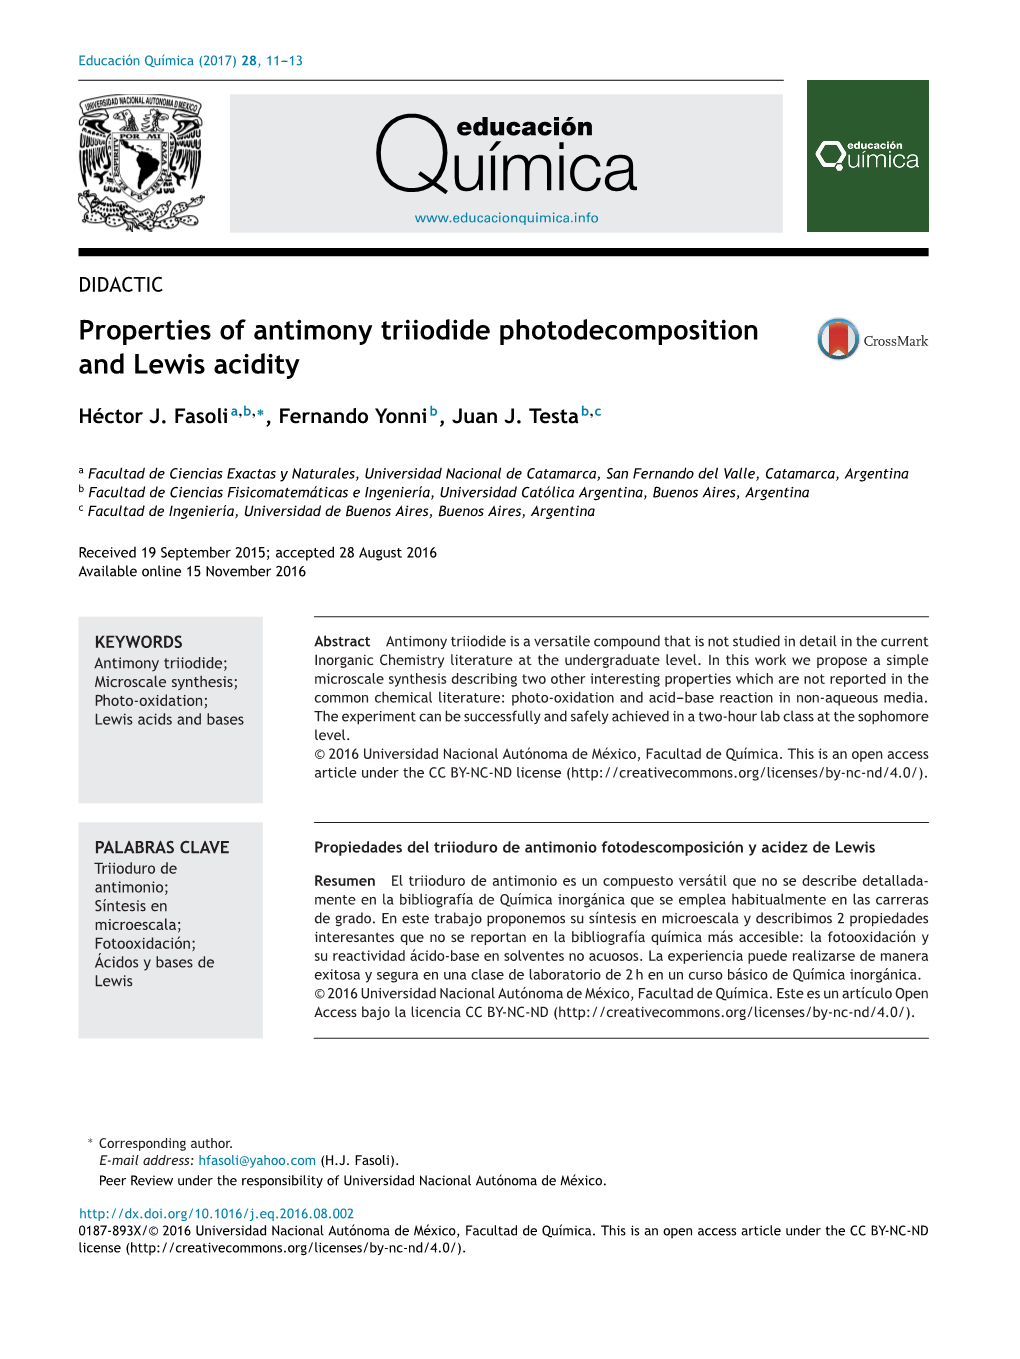 Properties of Antimony Triiodide Photodecomposition and Lewis Acidity